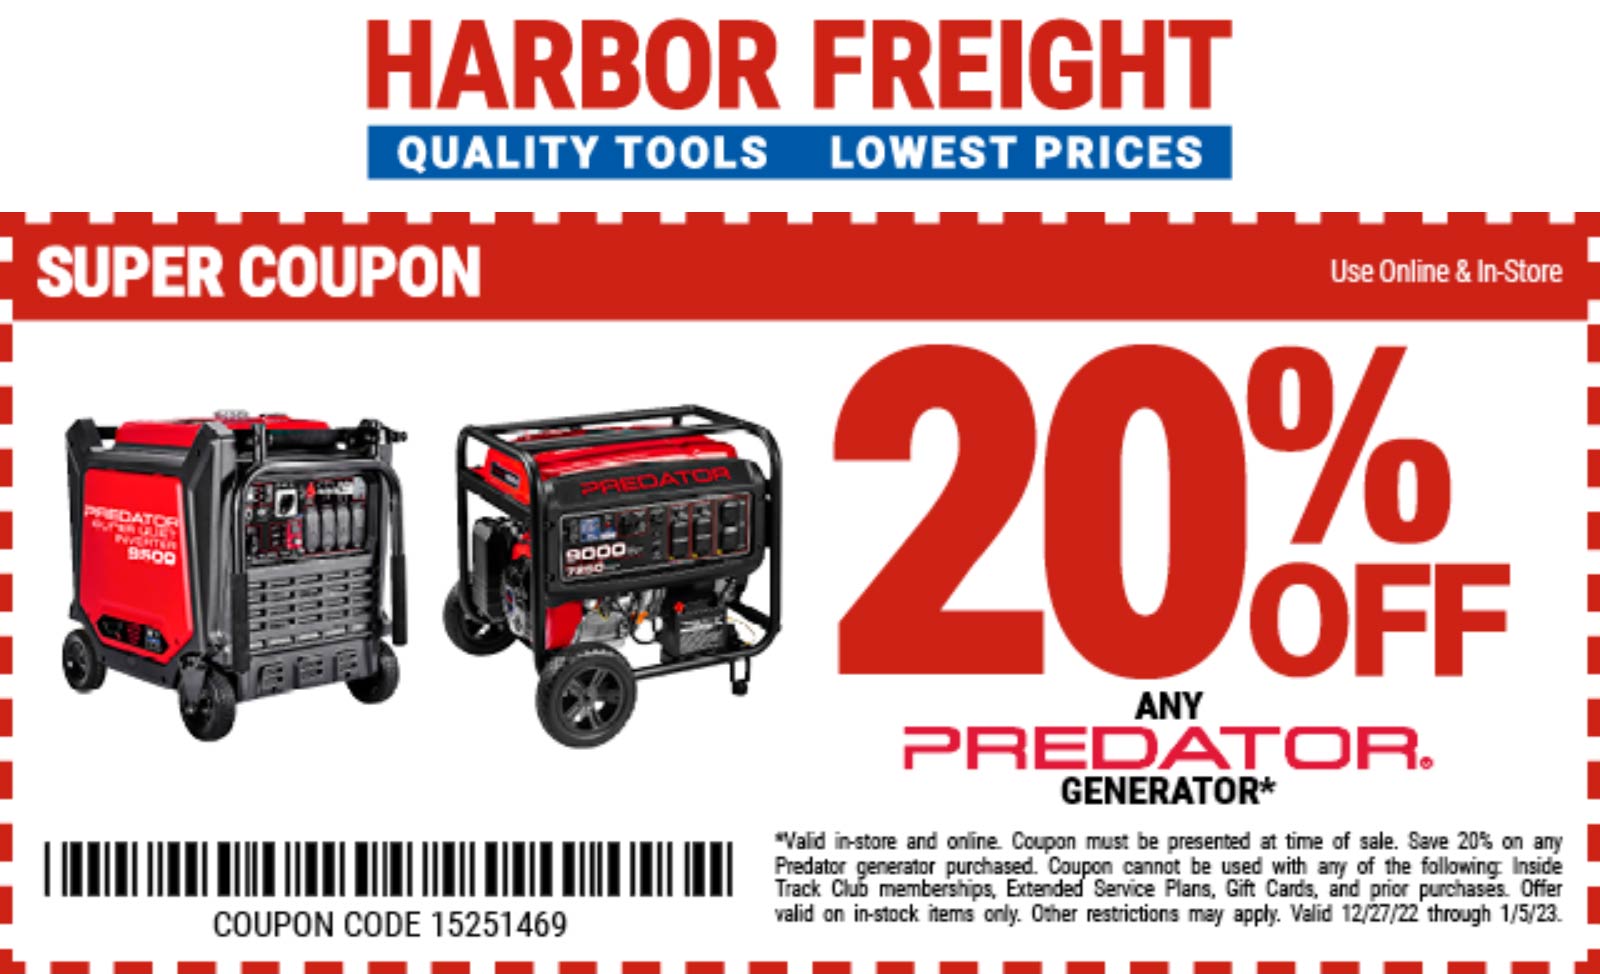 Harbor Freight stores Coupon  20% off generators at Harbor Freight Tools #harborfreight 